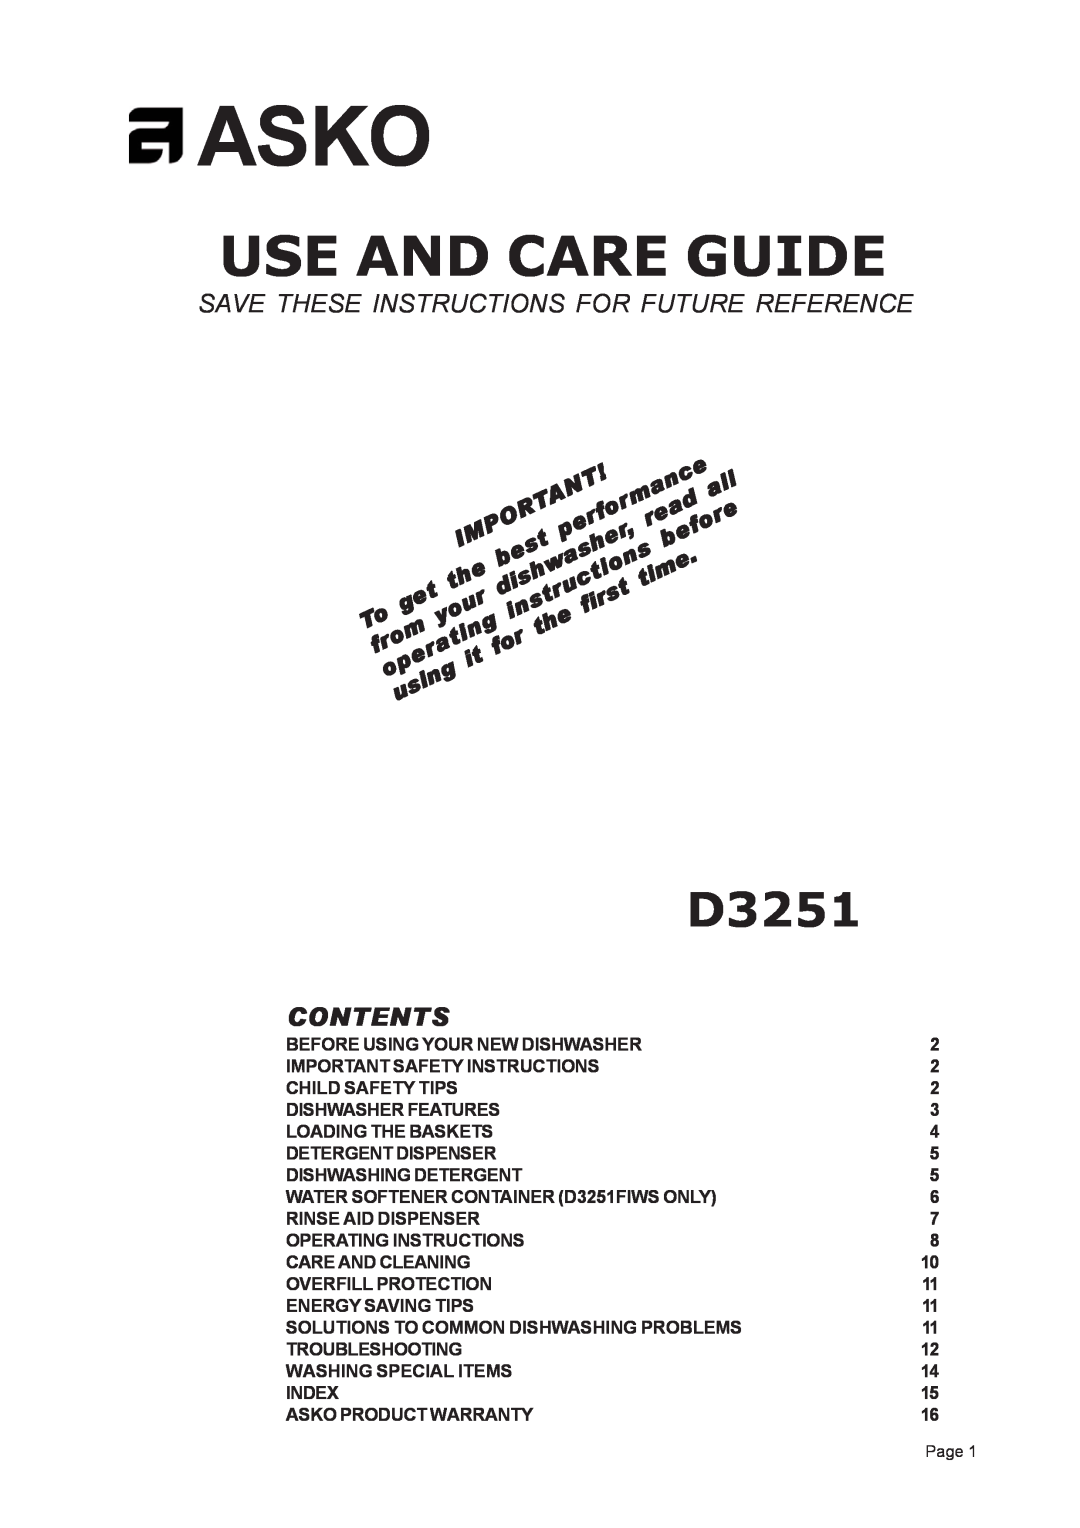 Asko D3251 important safety instructions Asko, Use And Care Guide, Save These Instructions For Future Reference, Contents 